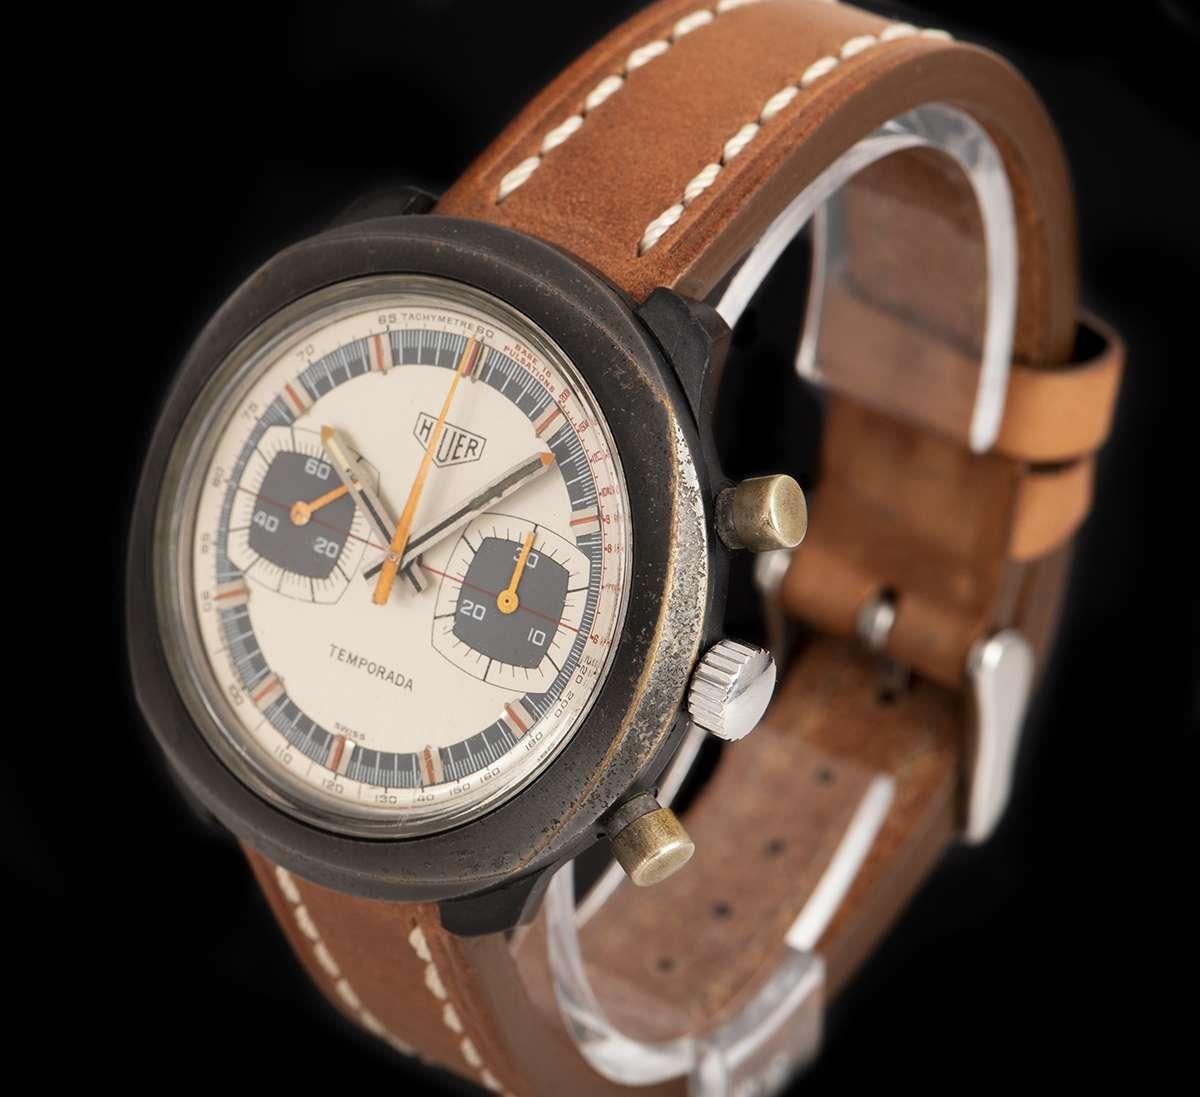 A Plastic Temporada Vintage Men's Wristwatch, silver dial with applied hour markers, 30-minute recorder at 3 0'clock, small seconds at 9 0'clock, a fixed bronze bezel, a brown leather strap (not by Heuer) with a stainless steel pin buckle (not by